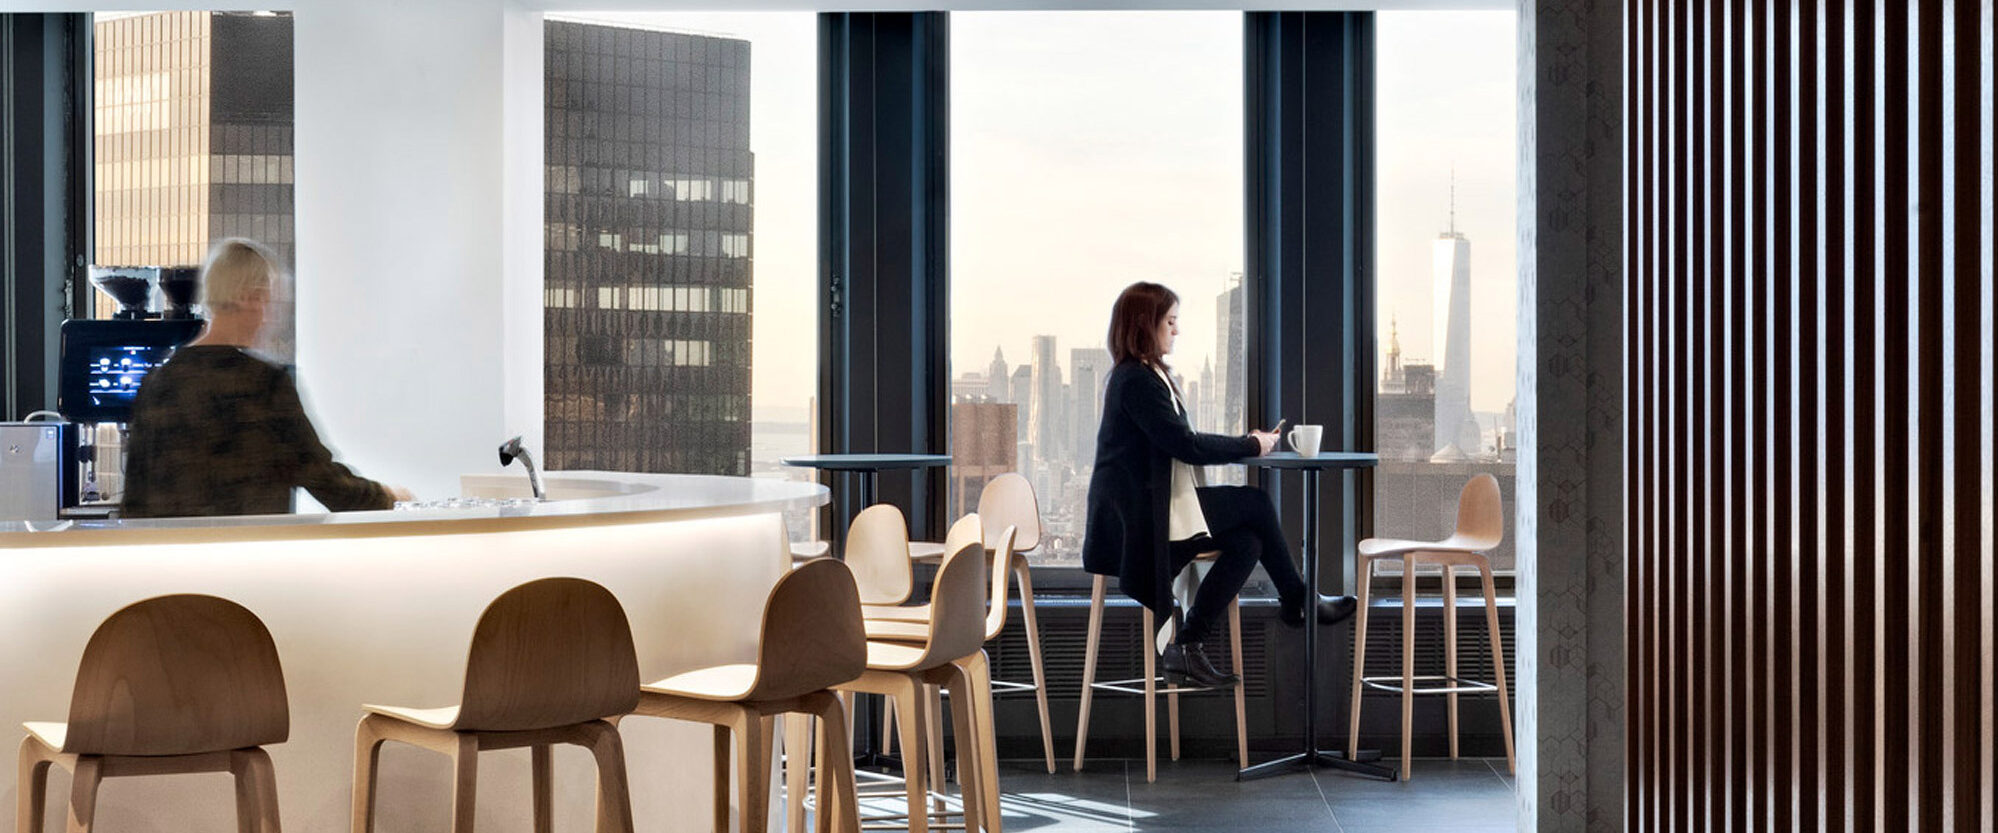 Modern office break area with layered acoustic ceiling, minimalist bar seating, sleek surfaces, and floor-to-ceiling windows revealing a cityscape. Vertical wooden slats provide a textural contrast, enhancing spatial division and visual interest.